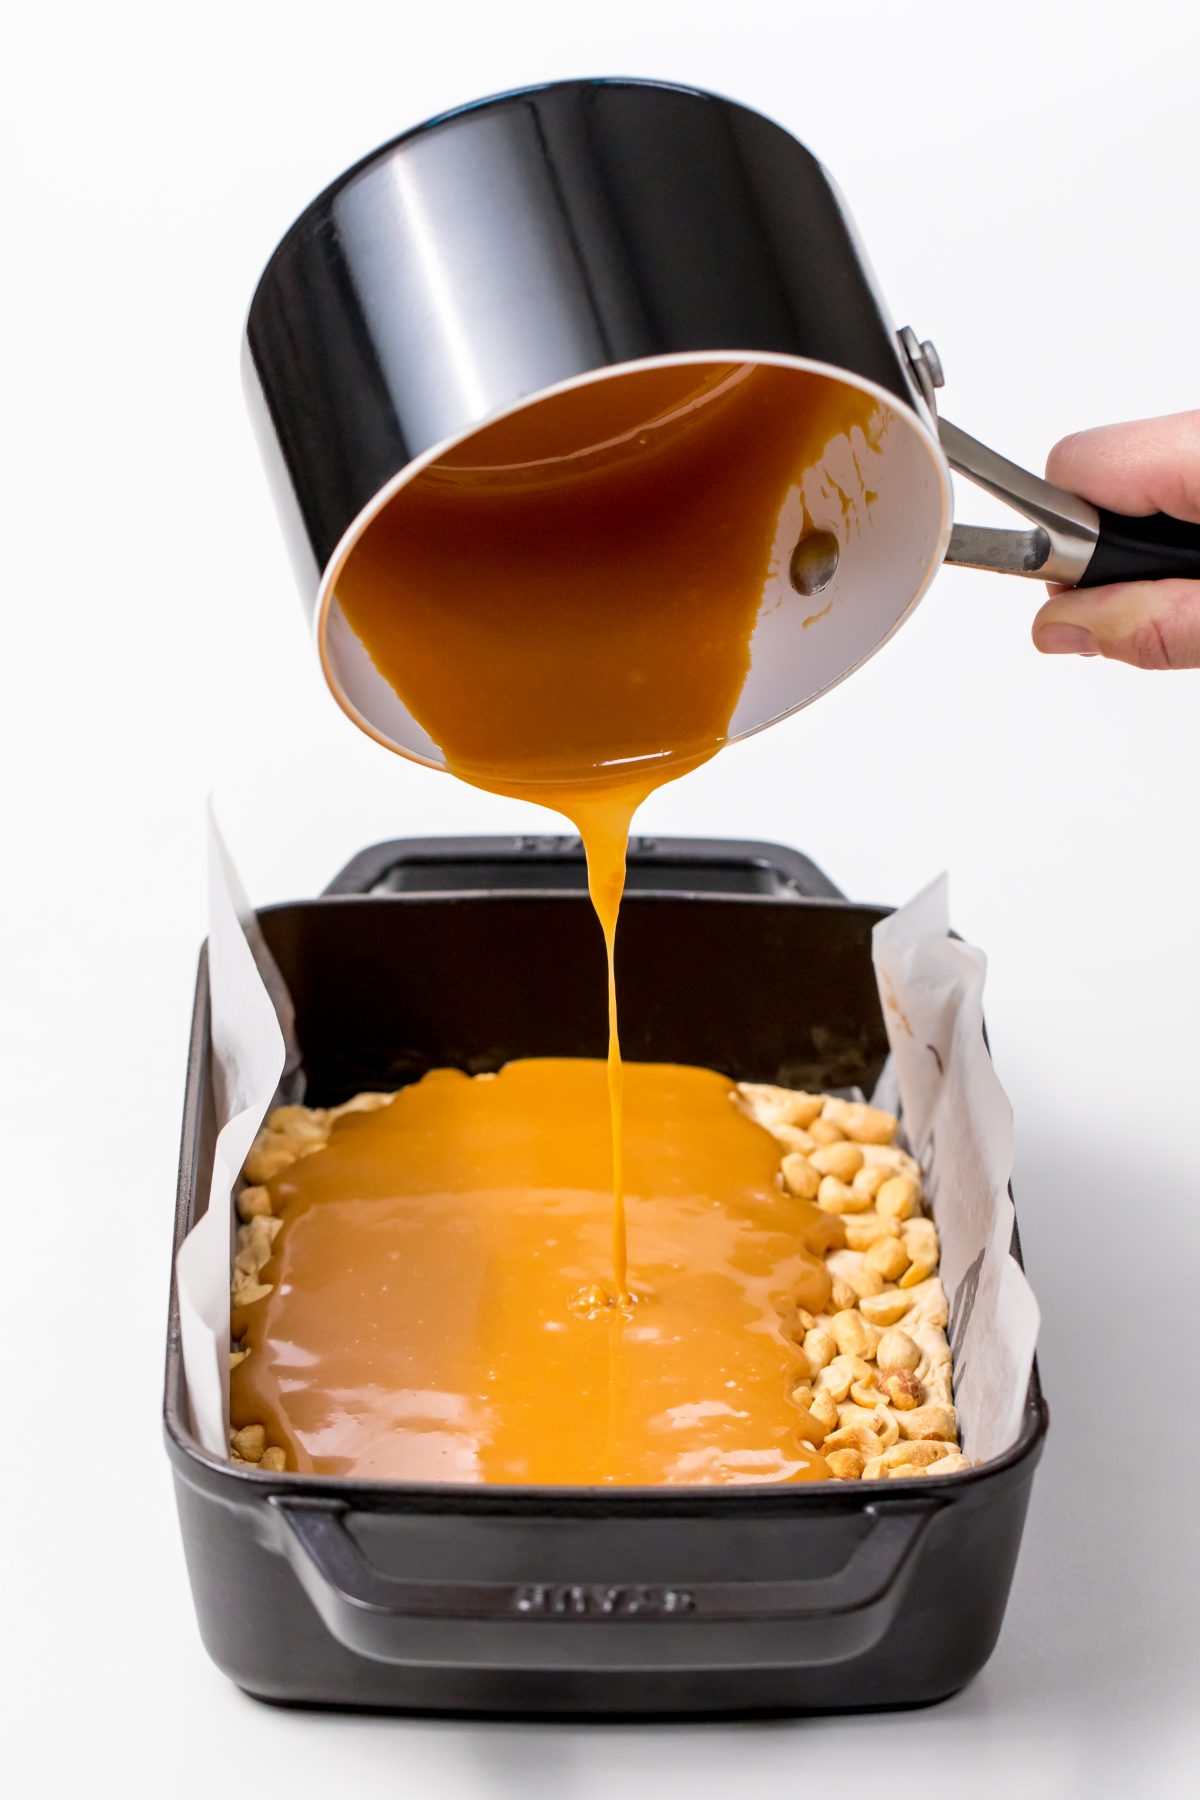 Pour melted caramel mixture into the baking dish